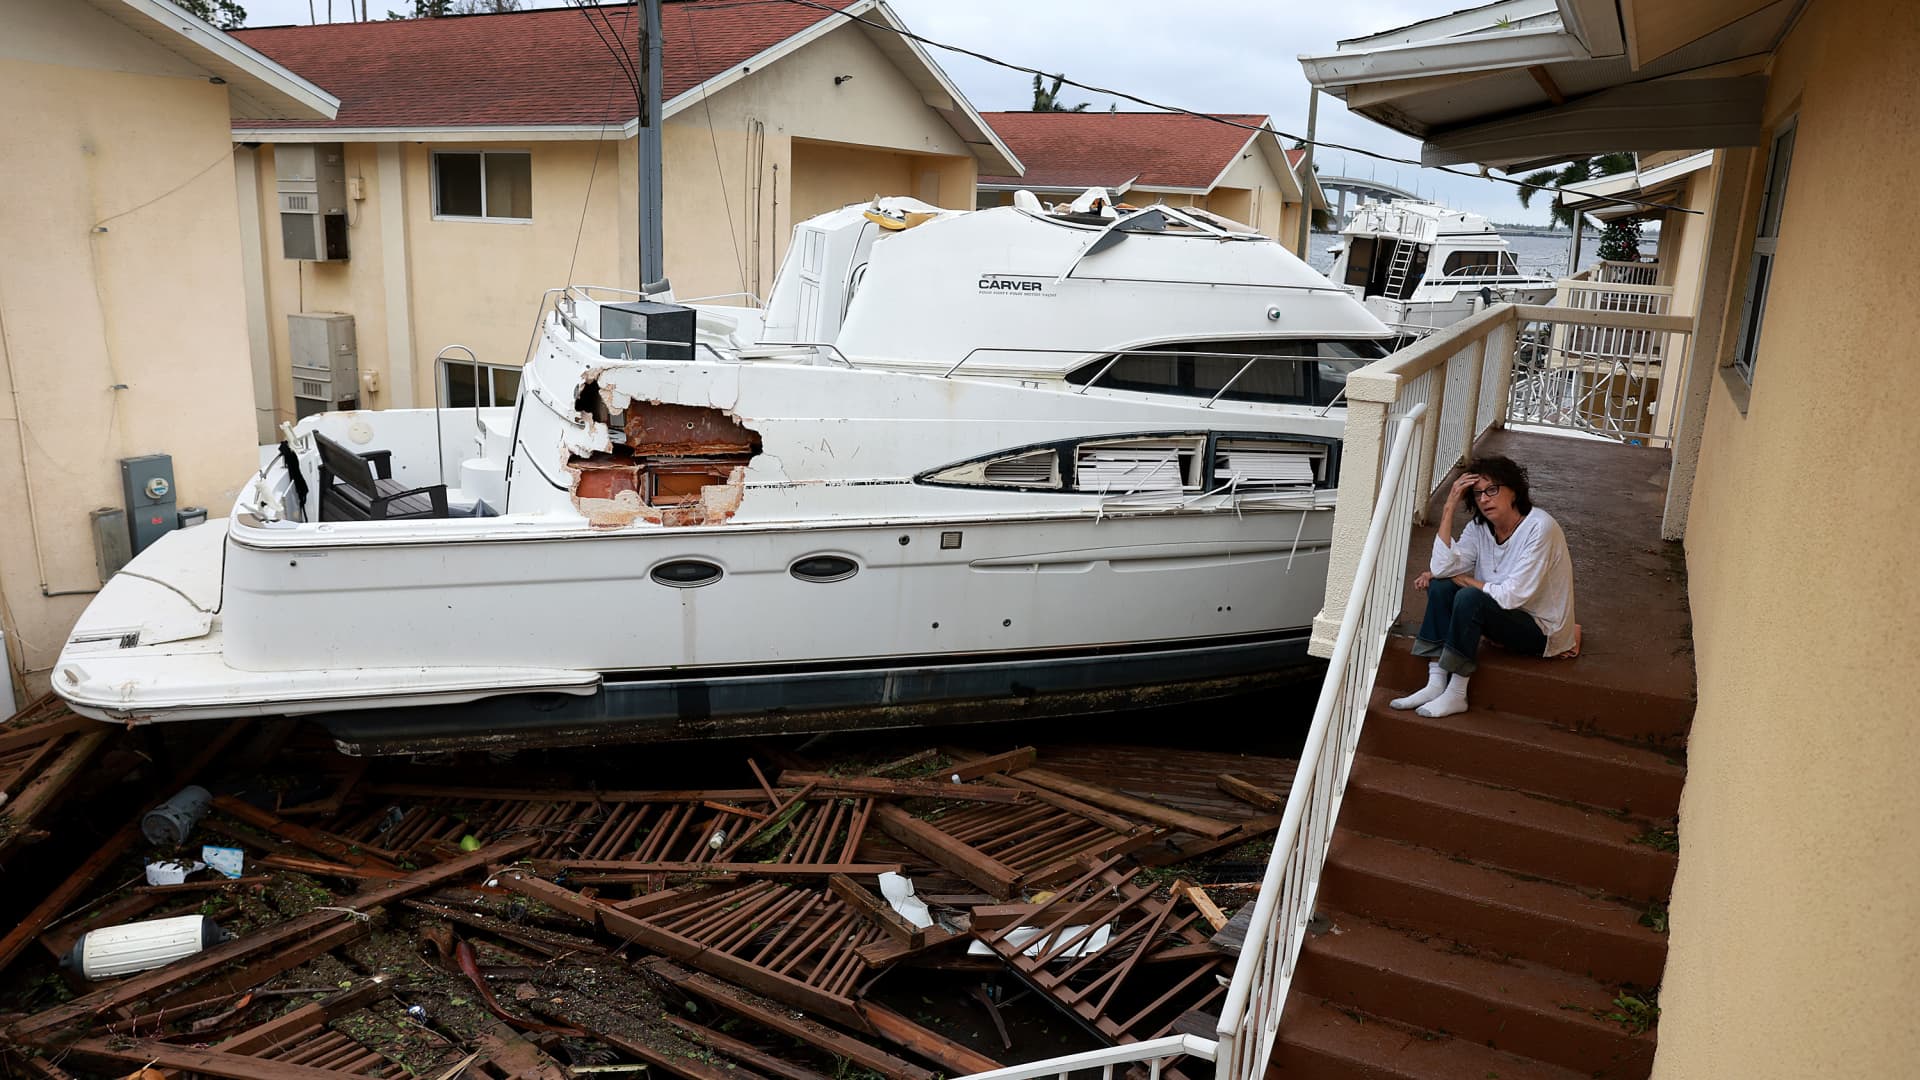 Brenda Brennan sits next to a boat that pushed against her apartment when Hurricane Ian passed through the area on September 29, 2022 in Fort Myers, Florida.